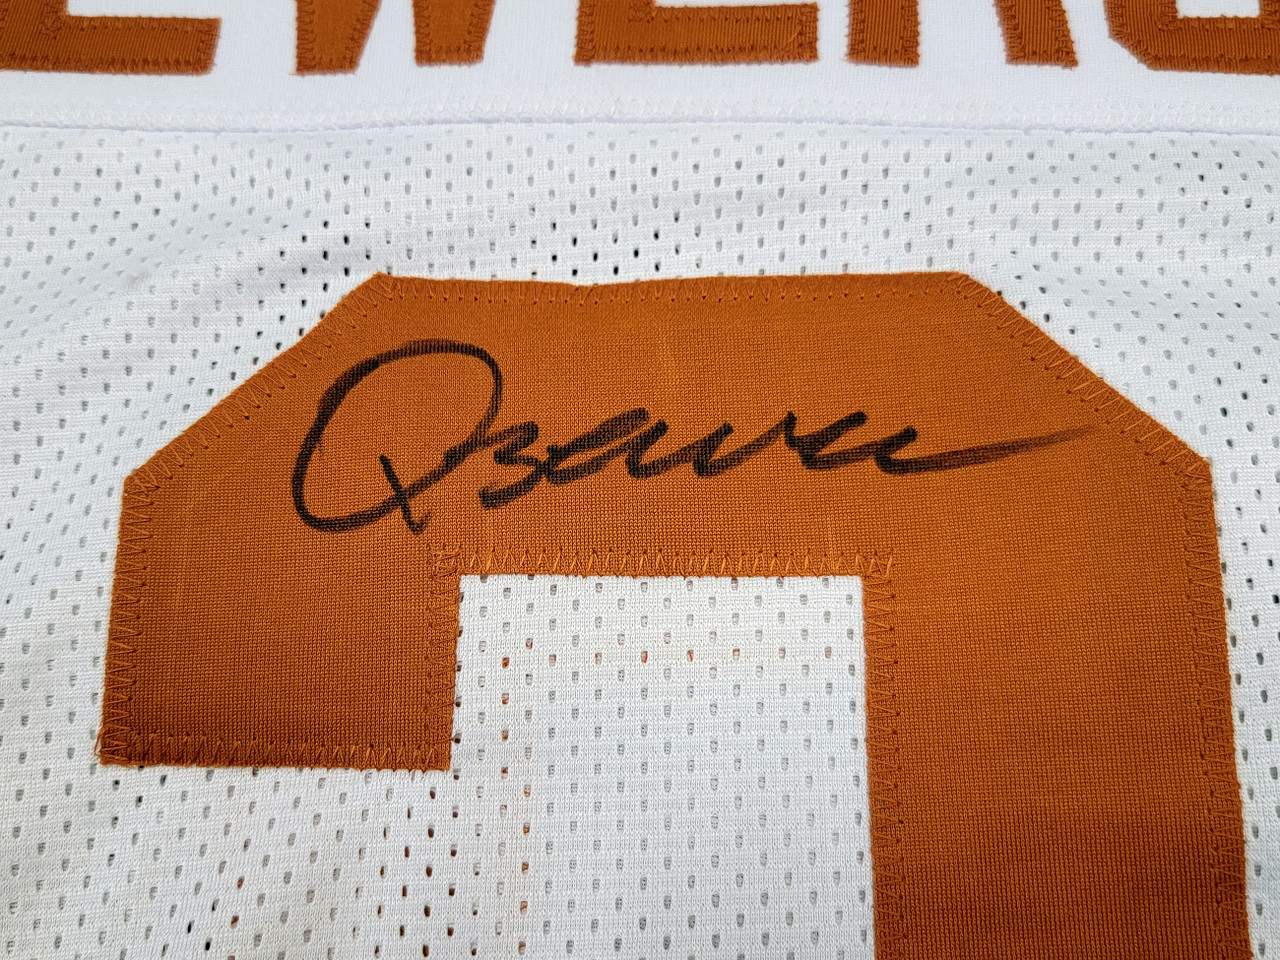 Quinn Ewers Autographed Signed Jersey - Beckett Authentic